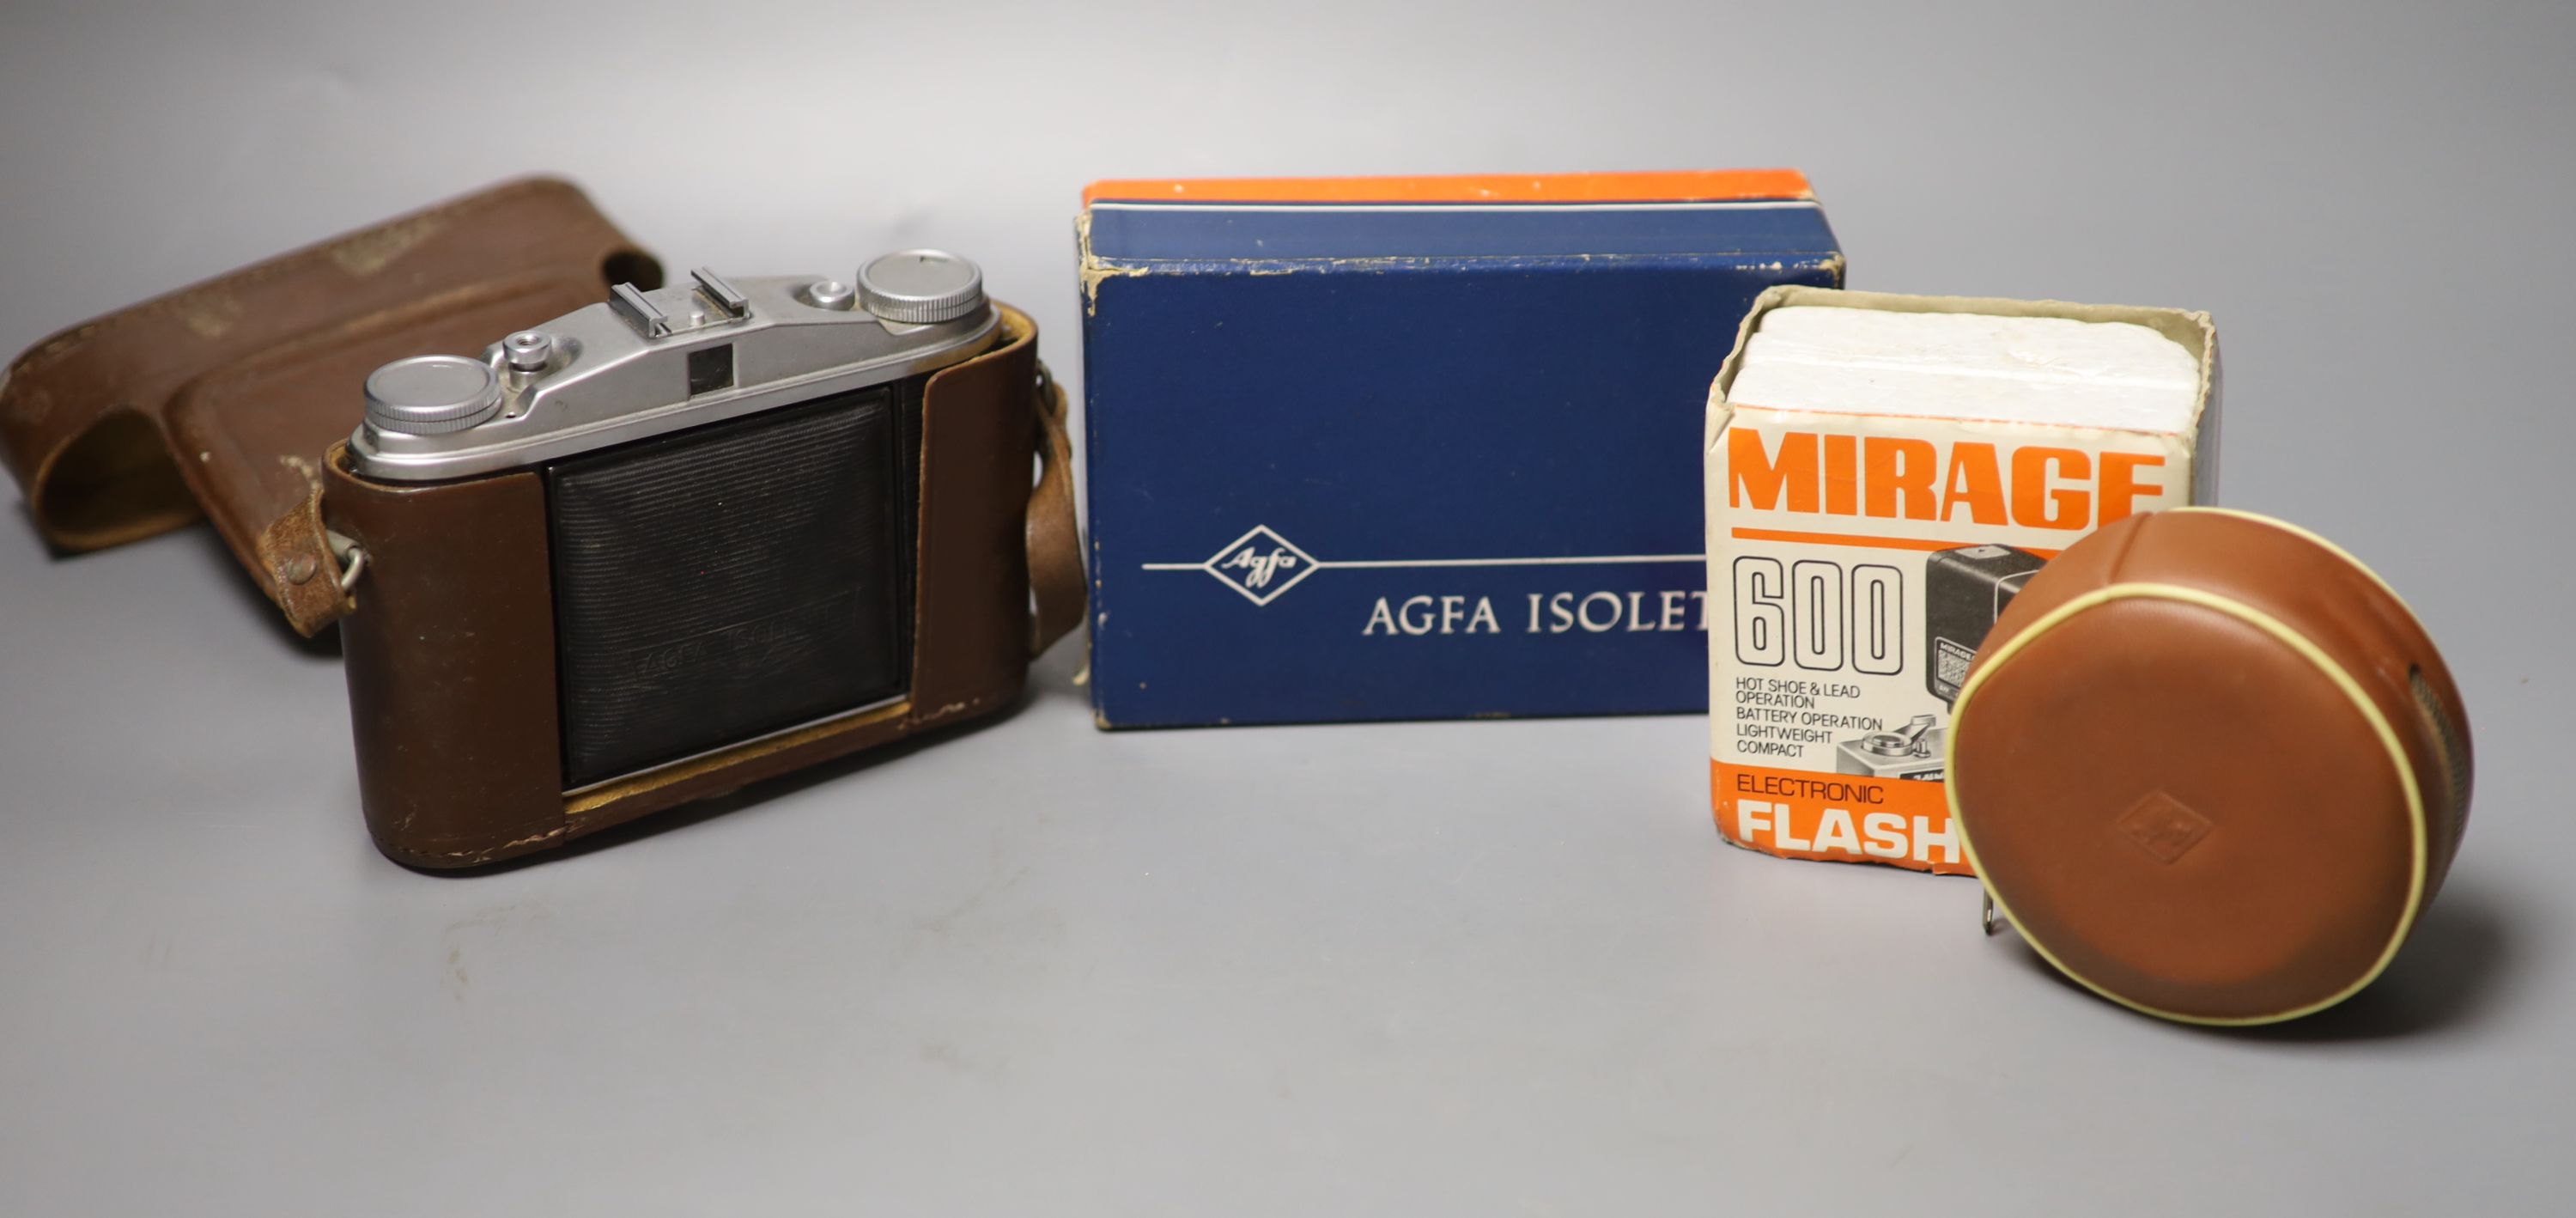 An Agfa Isolette II cased camera